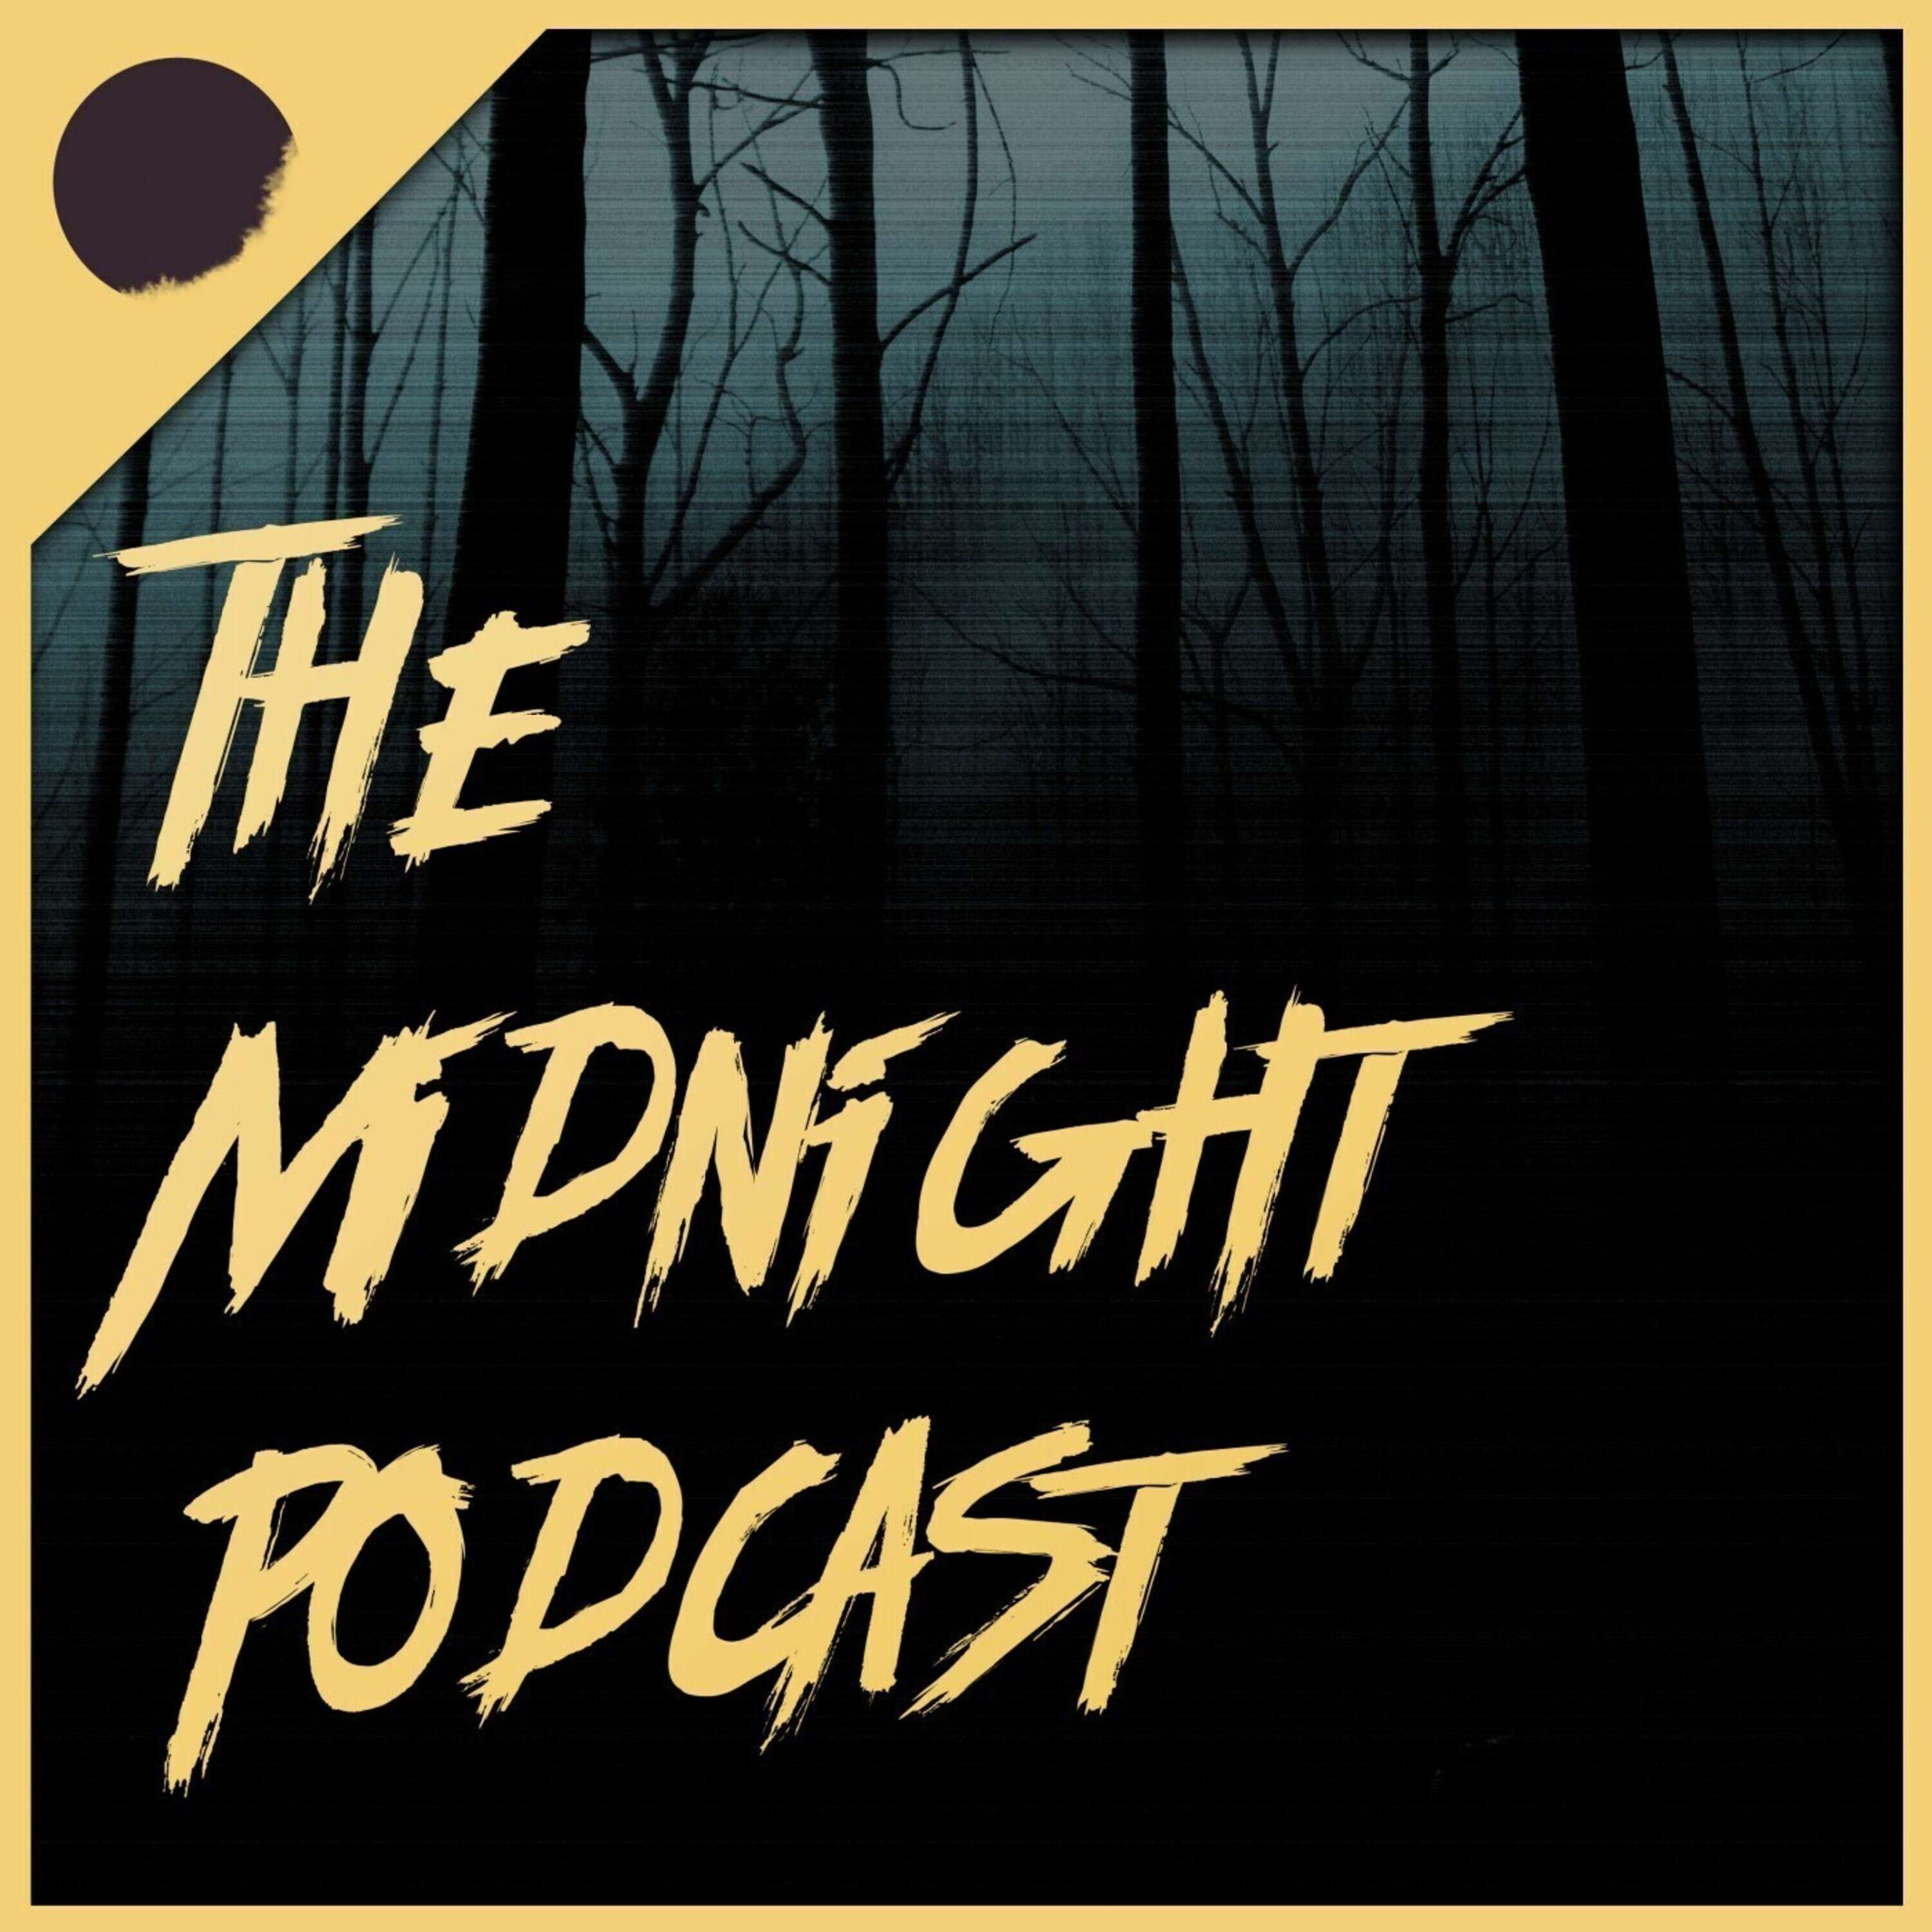 Episode 193 | I called the in-dream hotline for escaping nightmares